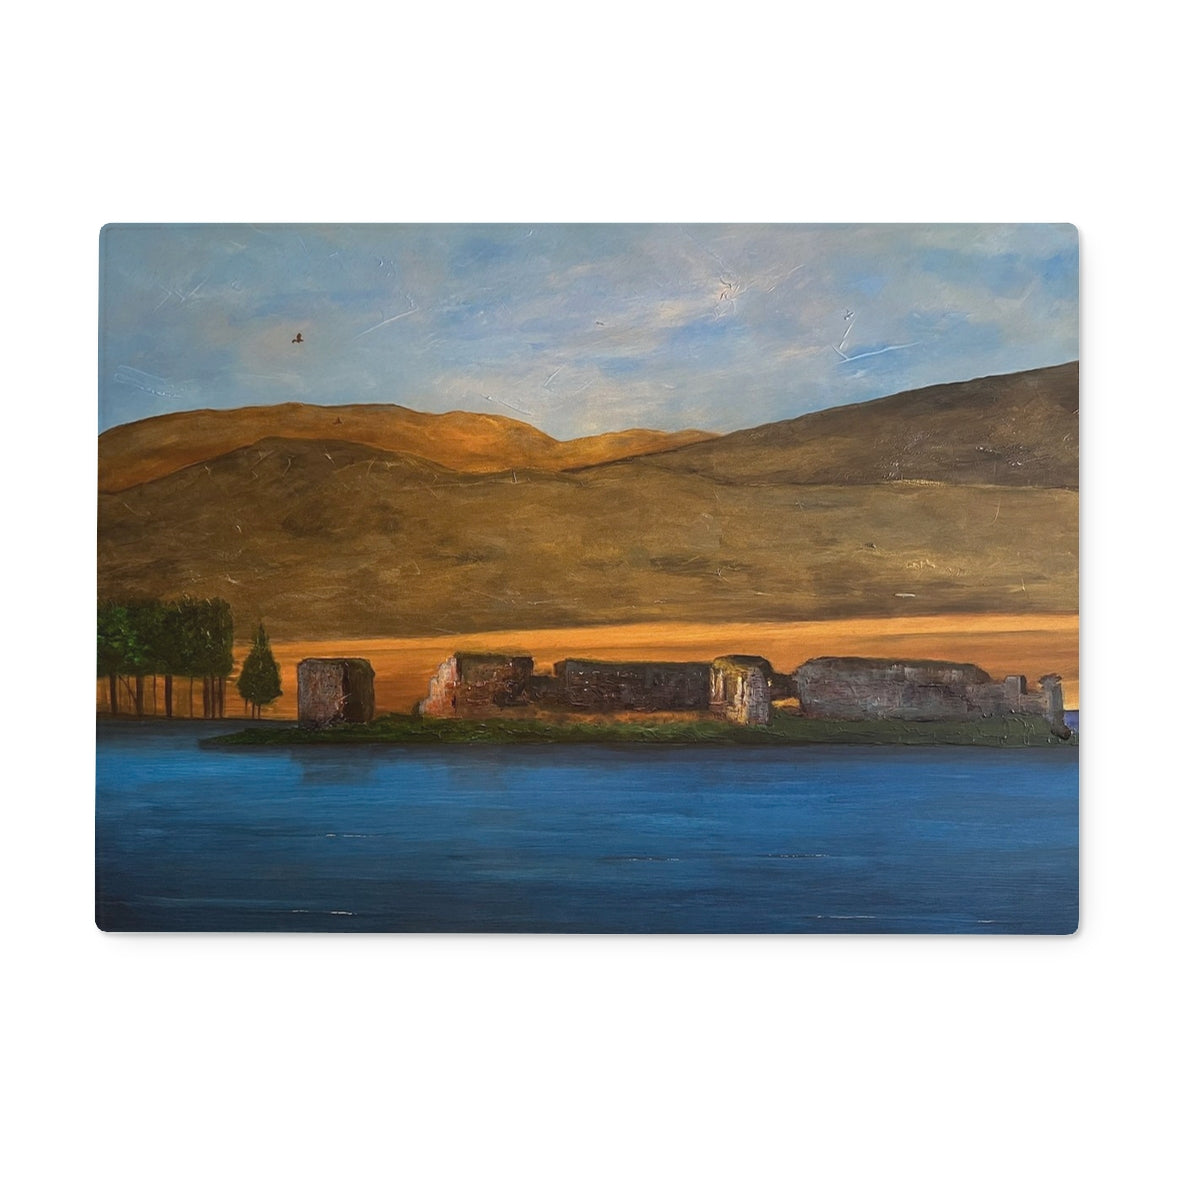 Lochindorb Castle Art Gifts Glass Chopping Board-Glass Chopping Boards-Scottish Lochs & Mountains Art Gallery-15"x11" Rectangular-Paintings, Prints, Homeware, Art Gifts From Scotland By Scottish Artist Kevin Hunter